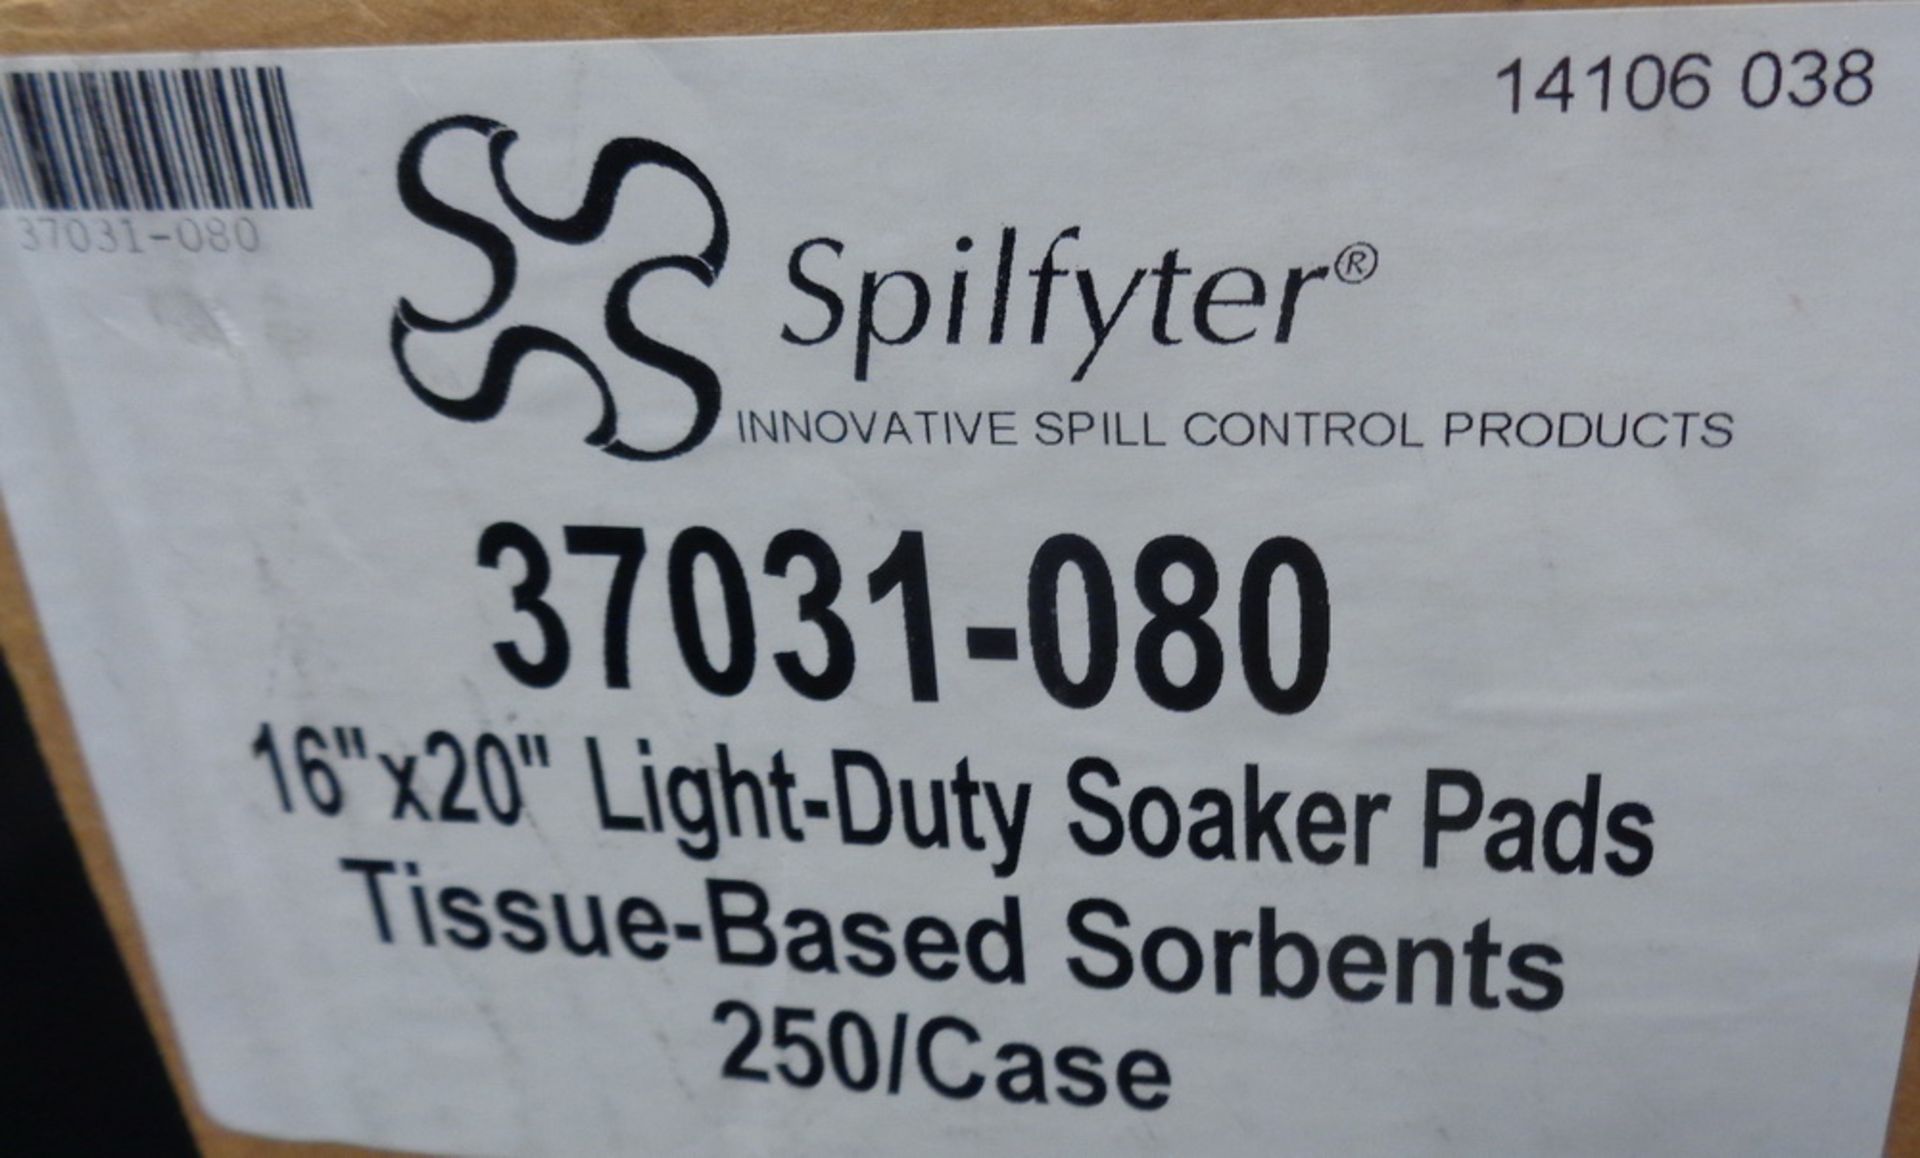 (2) Boxes of Spilfyter 16" x 20" Light-Duty Soaker Pads (250 per case) - Image 2 of 3